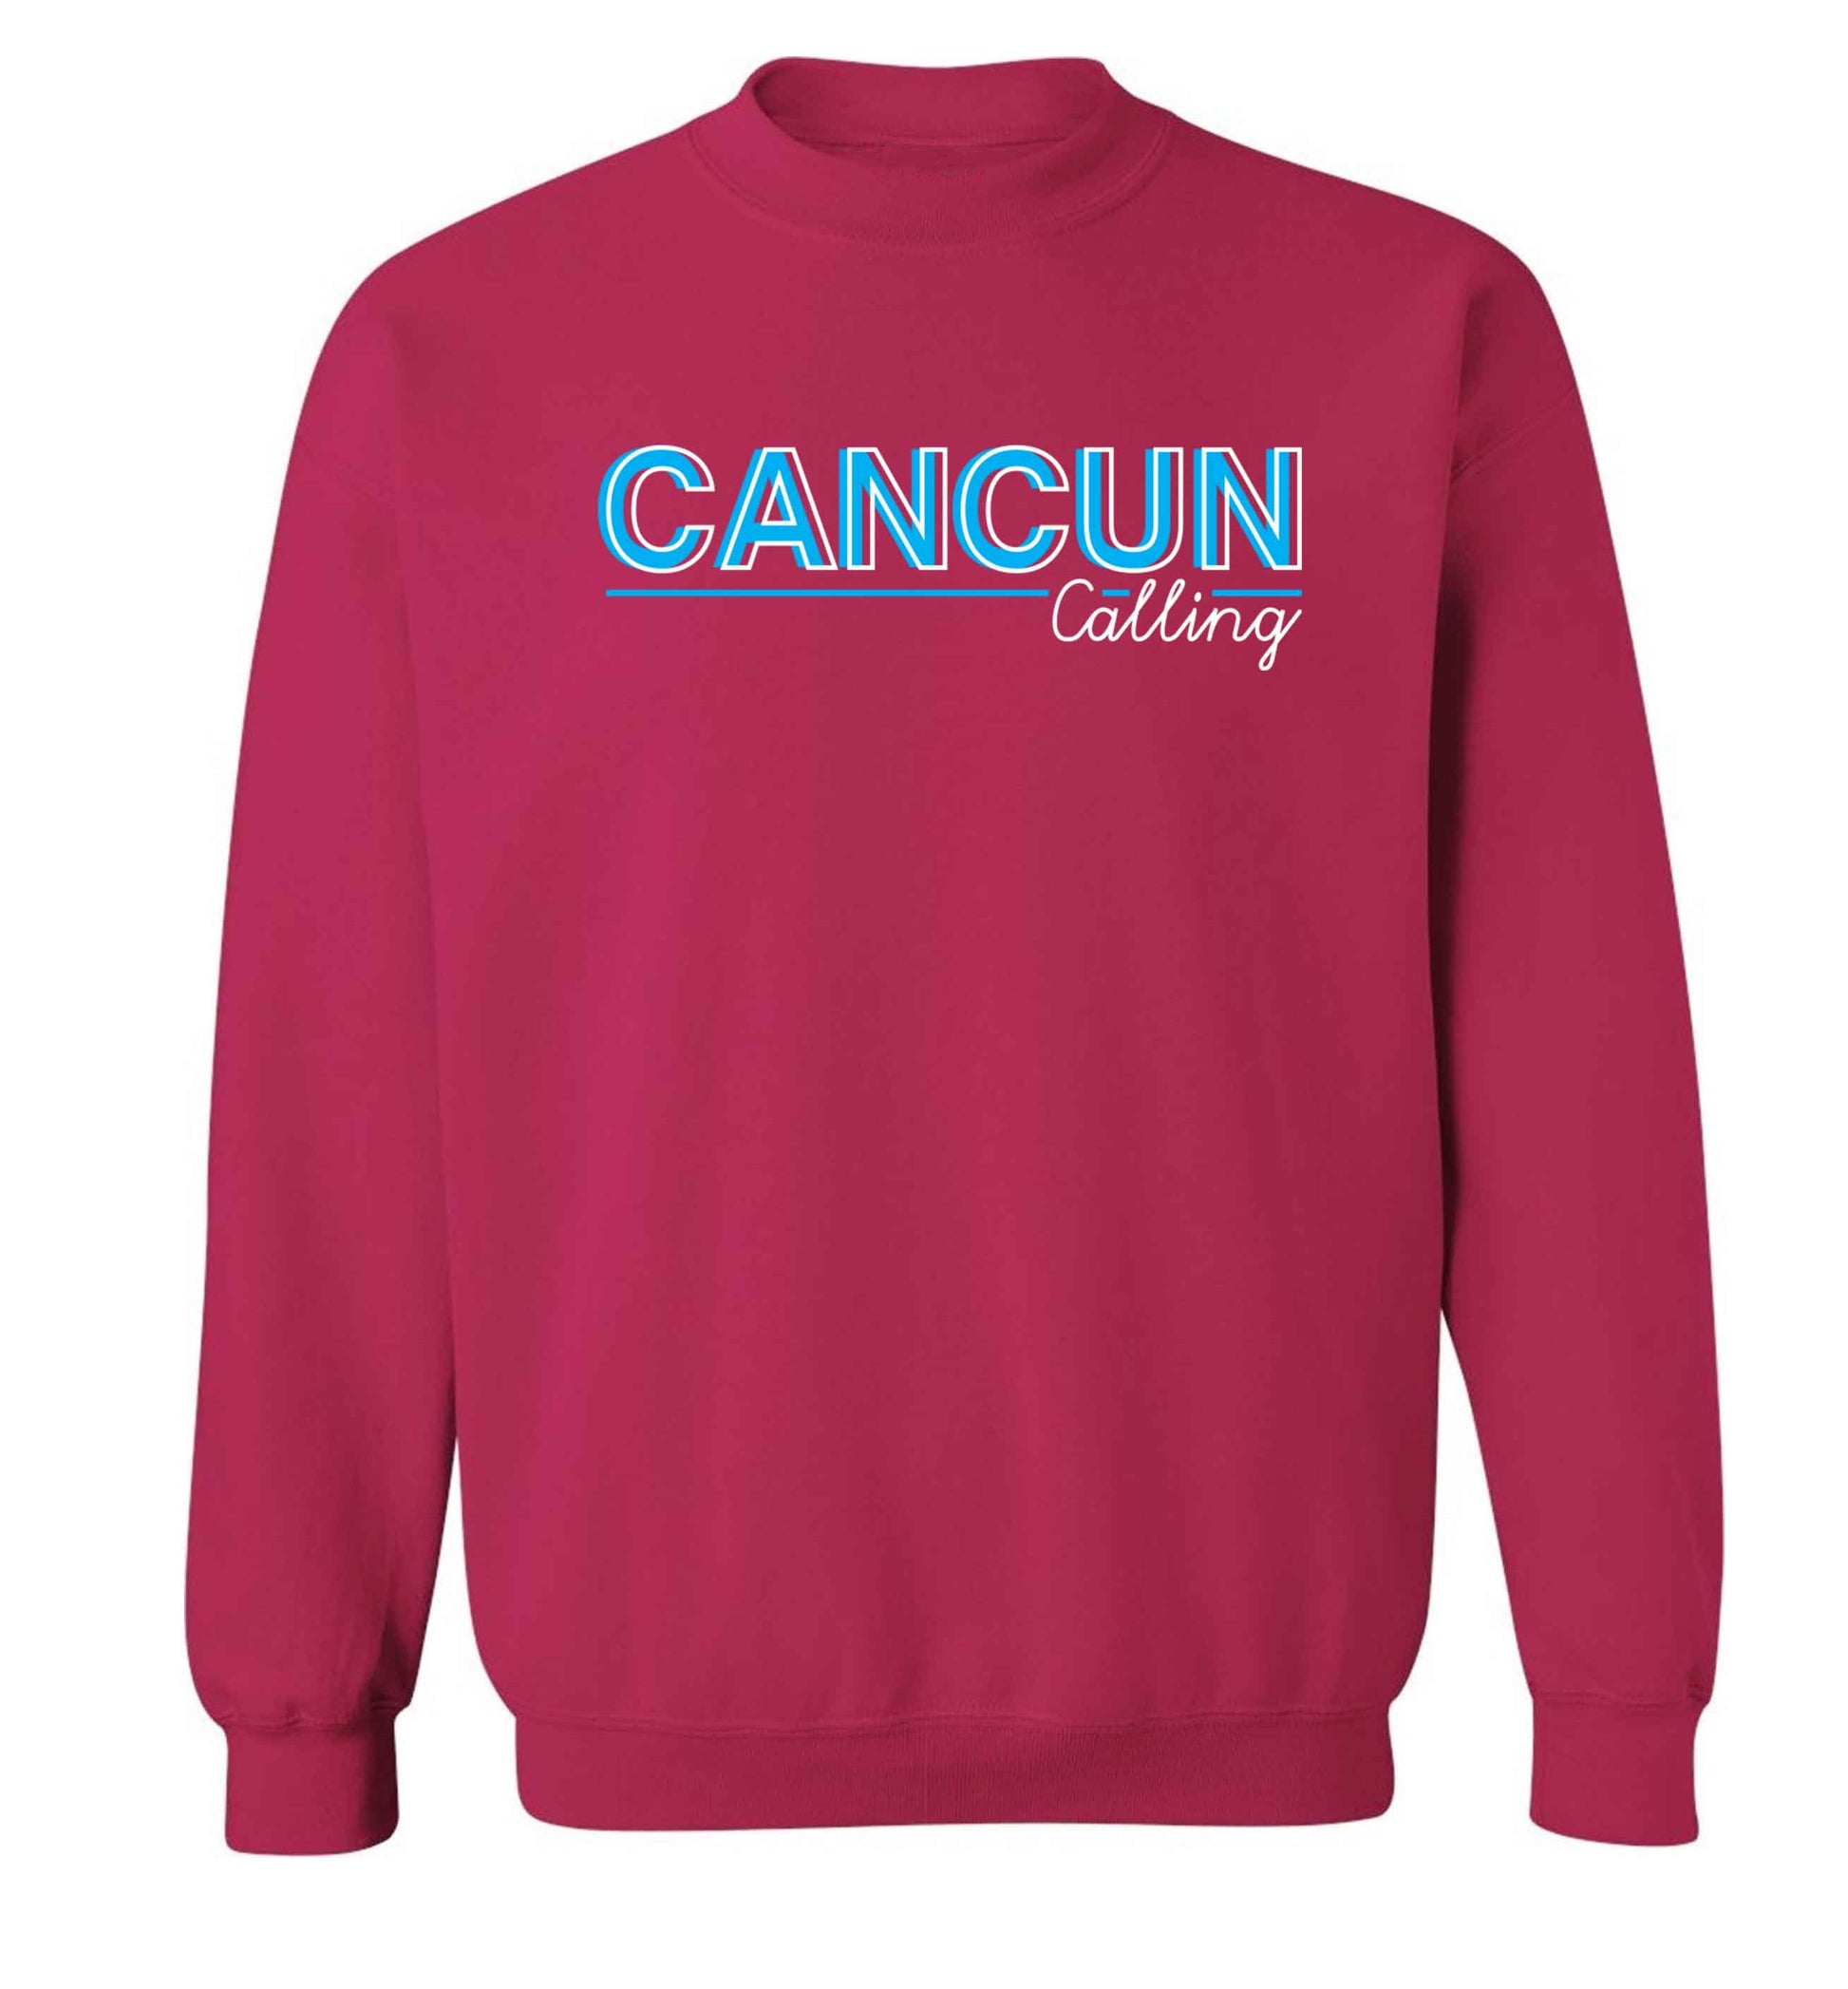 Cancun calling Adult's unisex pink Sweater 2XL